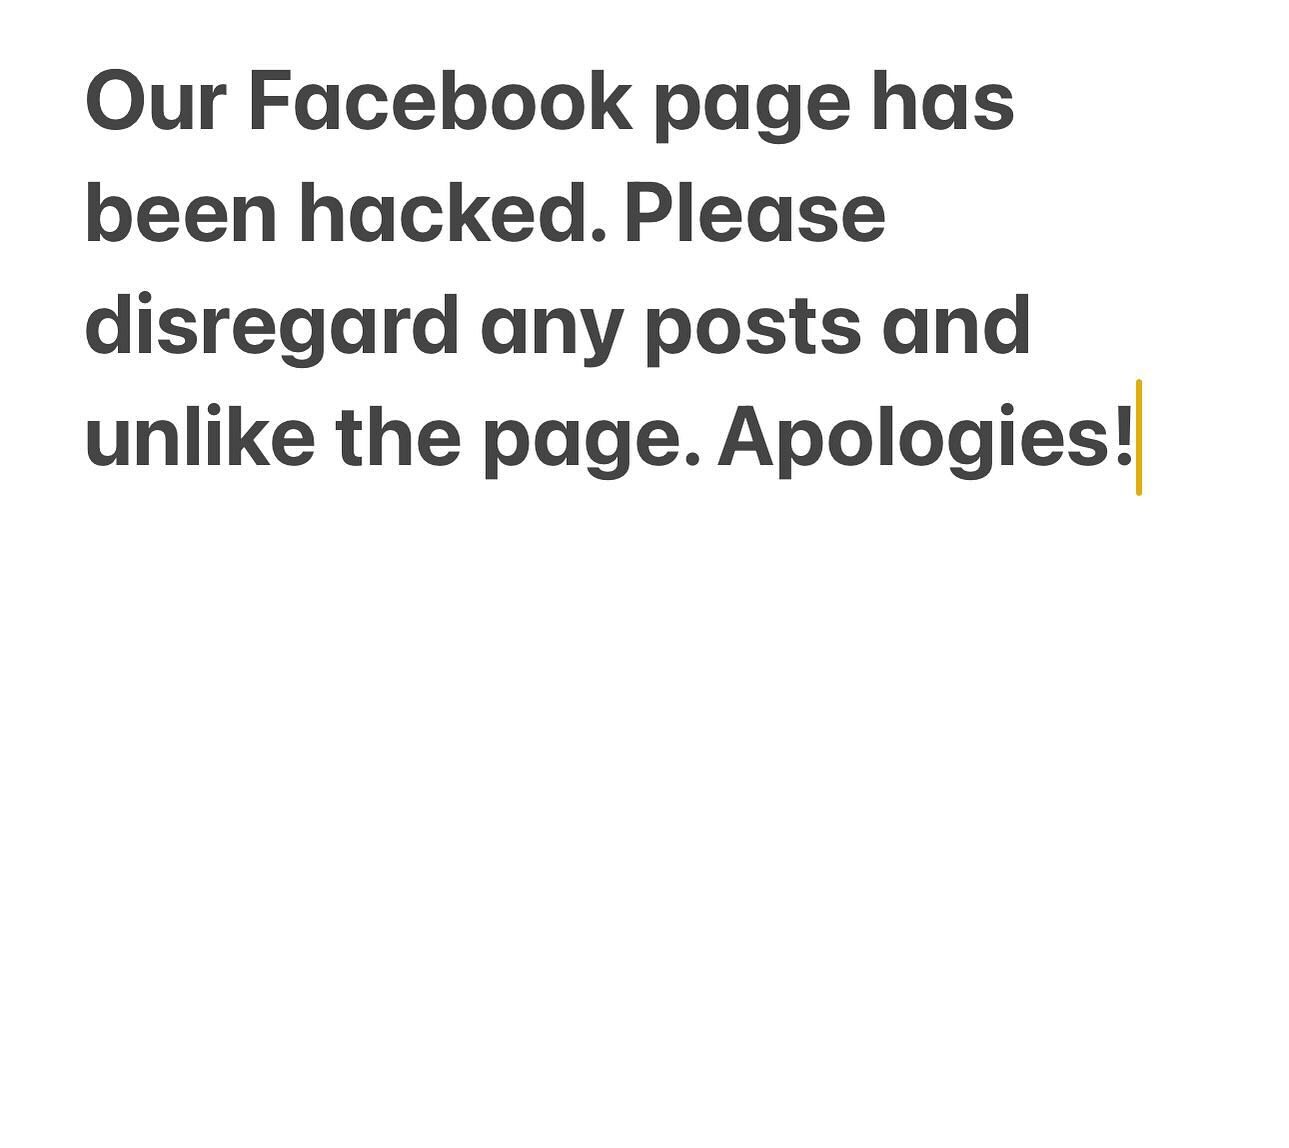 Our Facebook business page has been hacked! Please disregard all posts! Thanks for your understanding 😫 Our instagram is still us! Thanks! -Niki